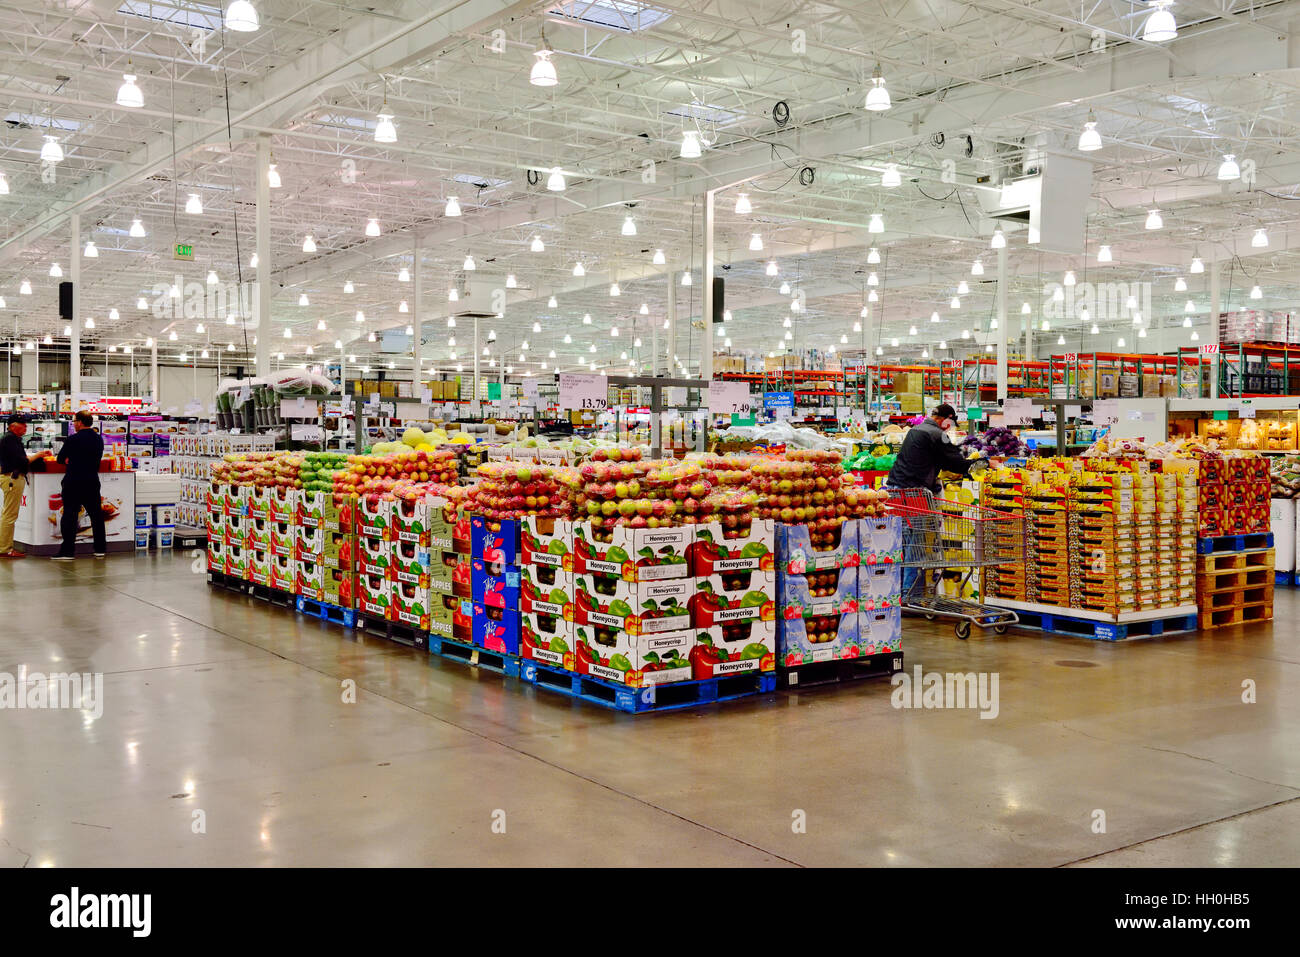 Inside a large Costco club warehouse type department store Stock Photo